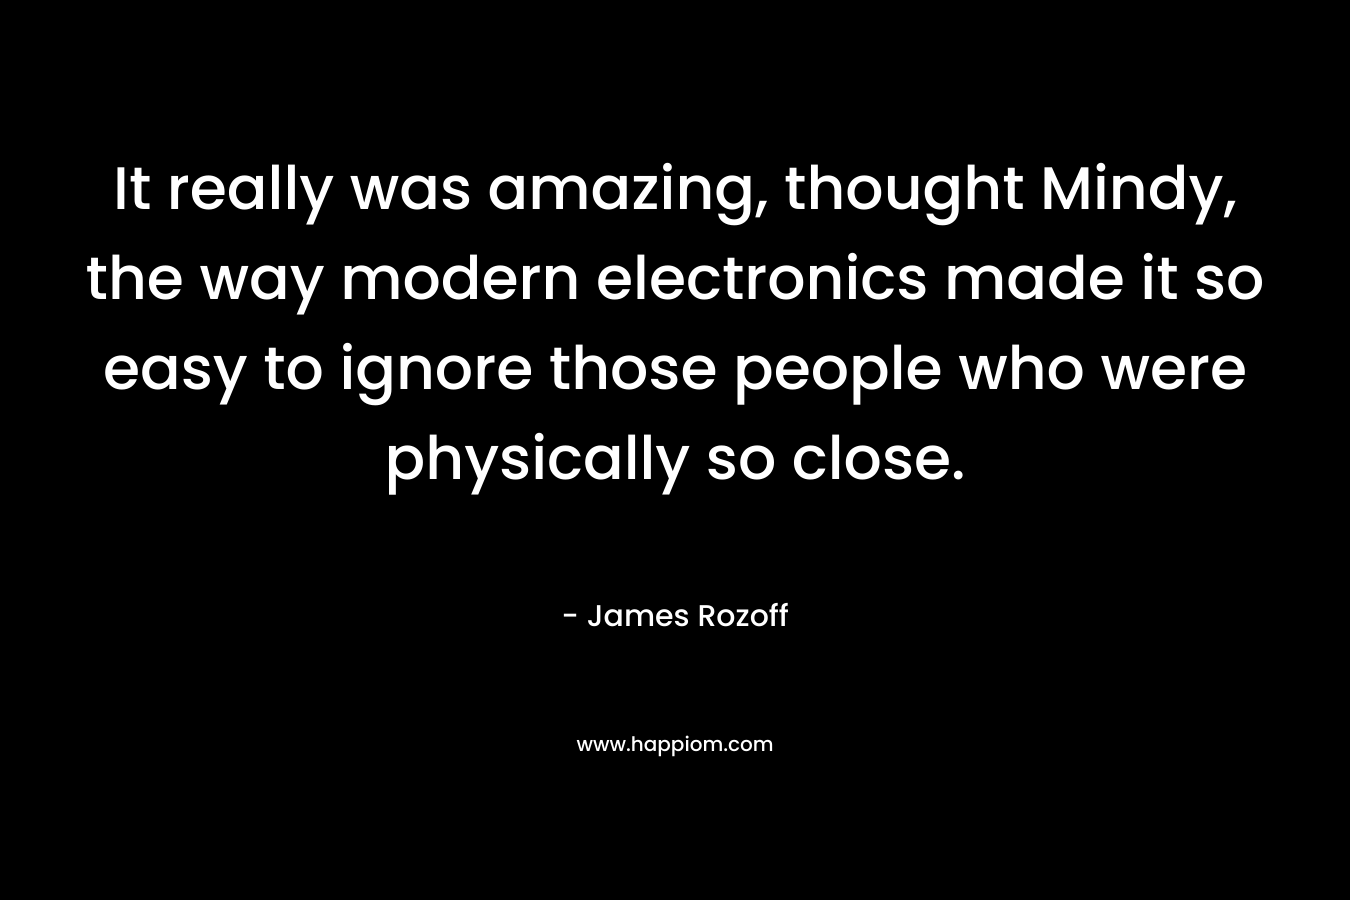 It really was amazing, thought Mindy, the way modern electronics made it so easy to ignore those people who were physically so close.